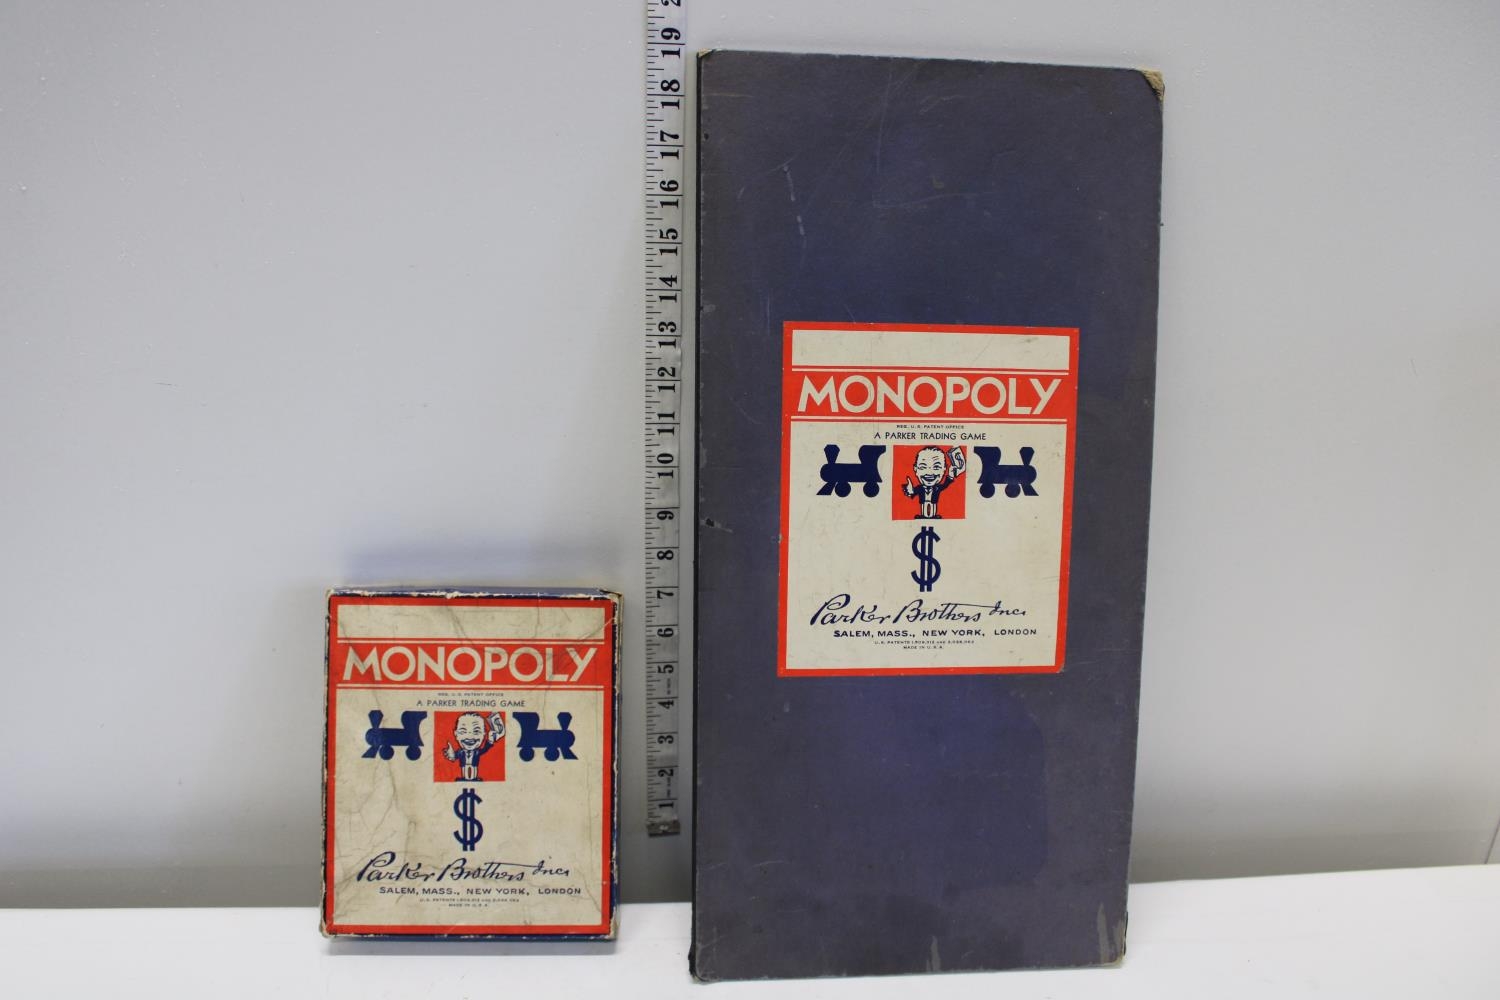 A 1930s American monopoly board game